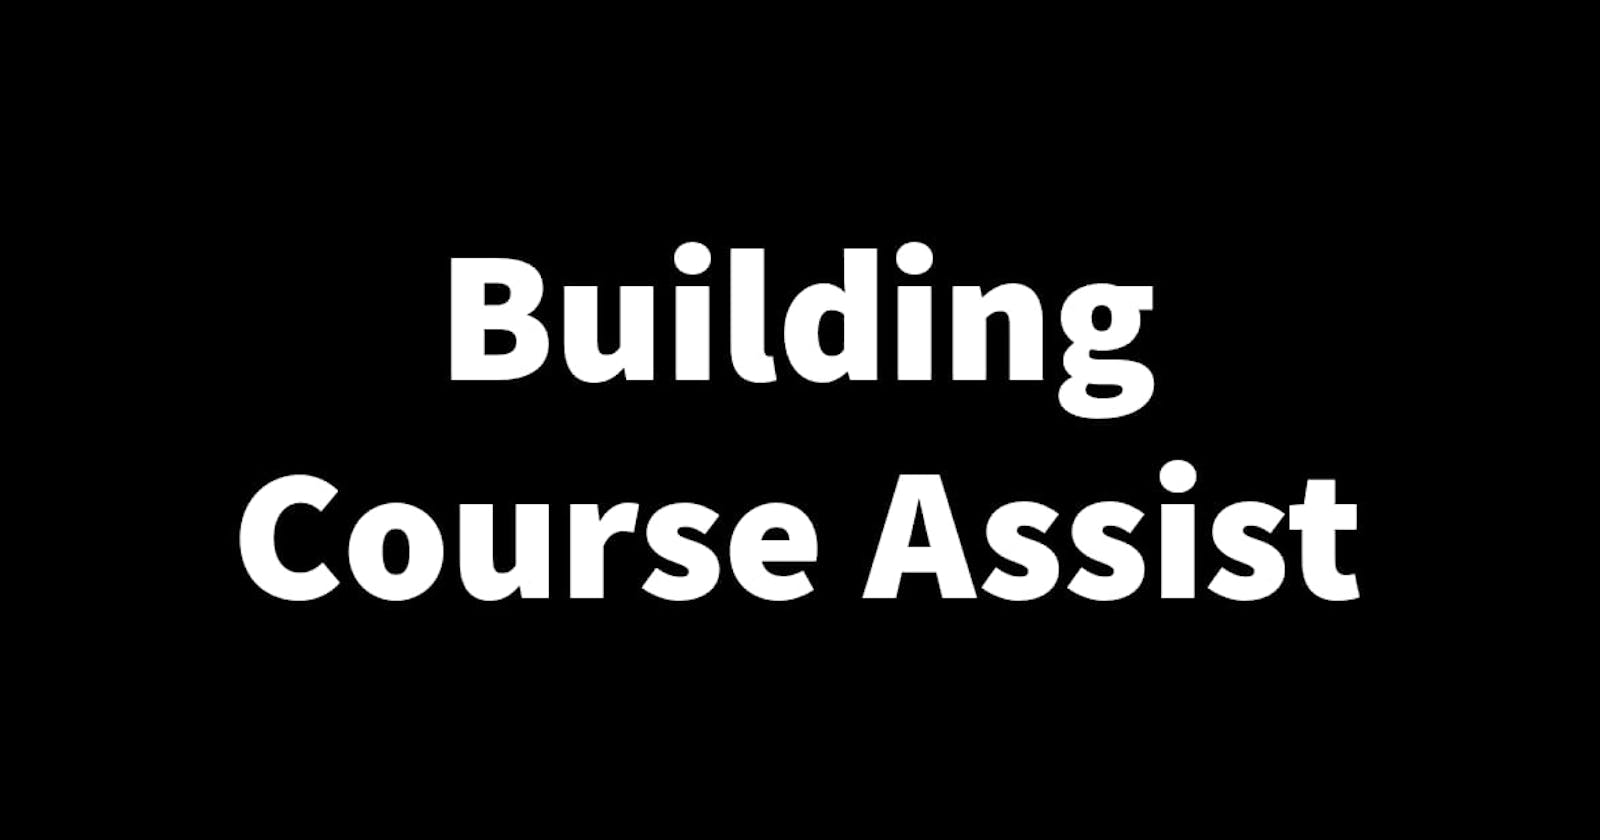 Building Course Assist Part 7: Adding some final features and bug fixes (2/2).